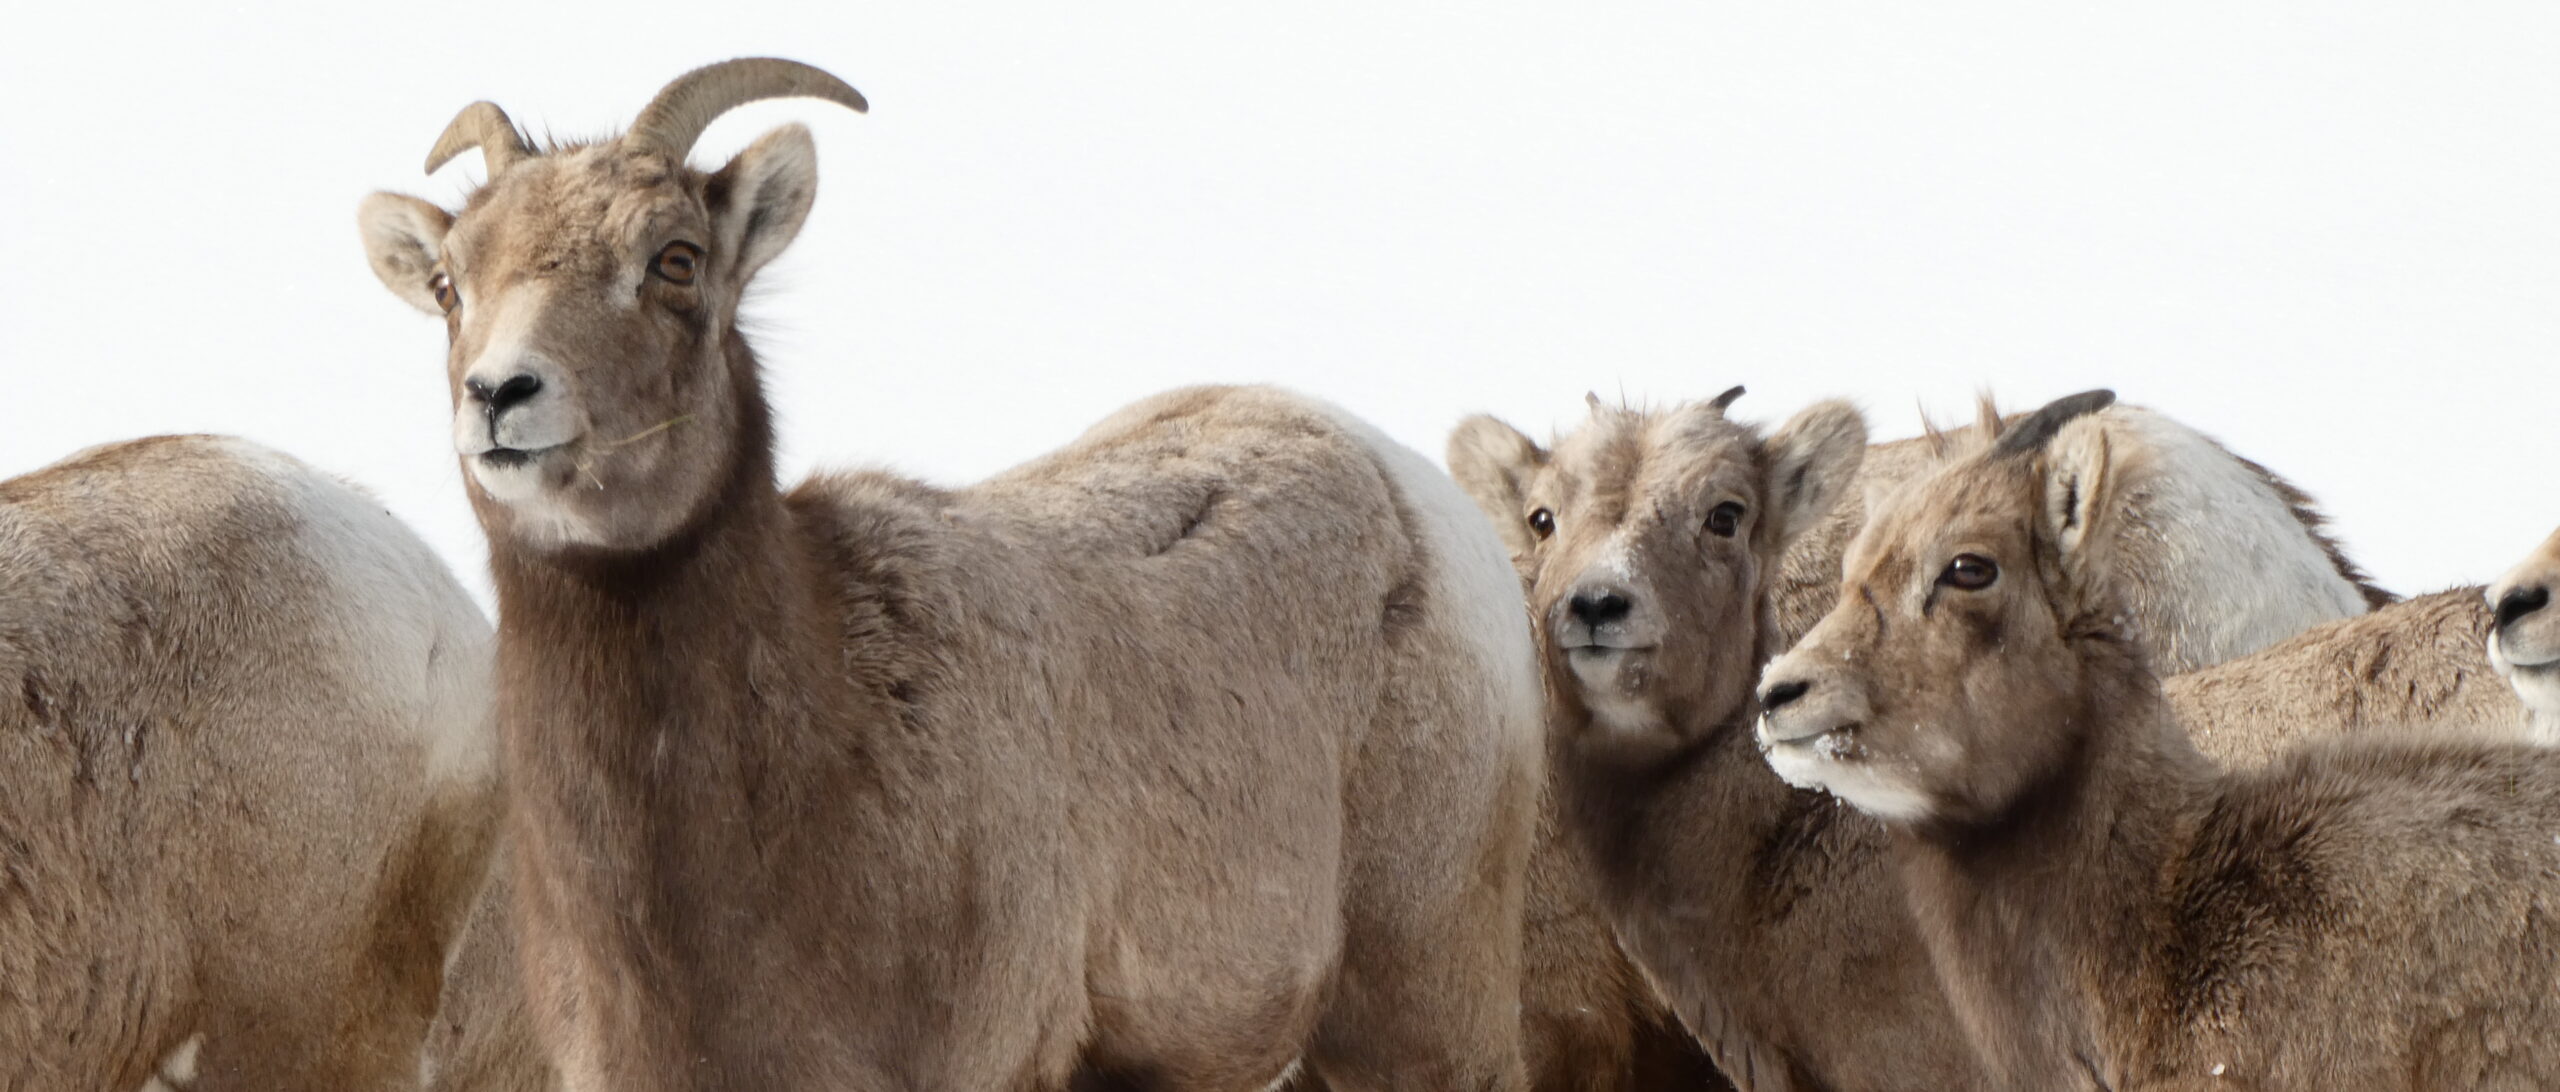 A female bighorn sheep with two lambs behind her.